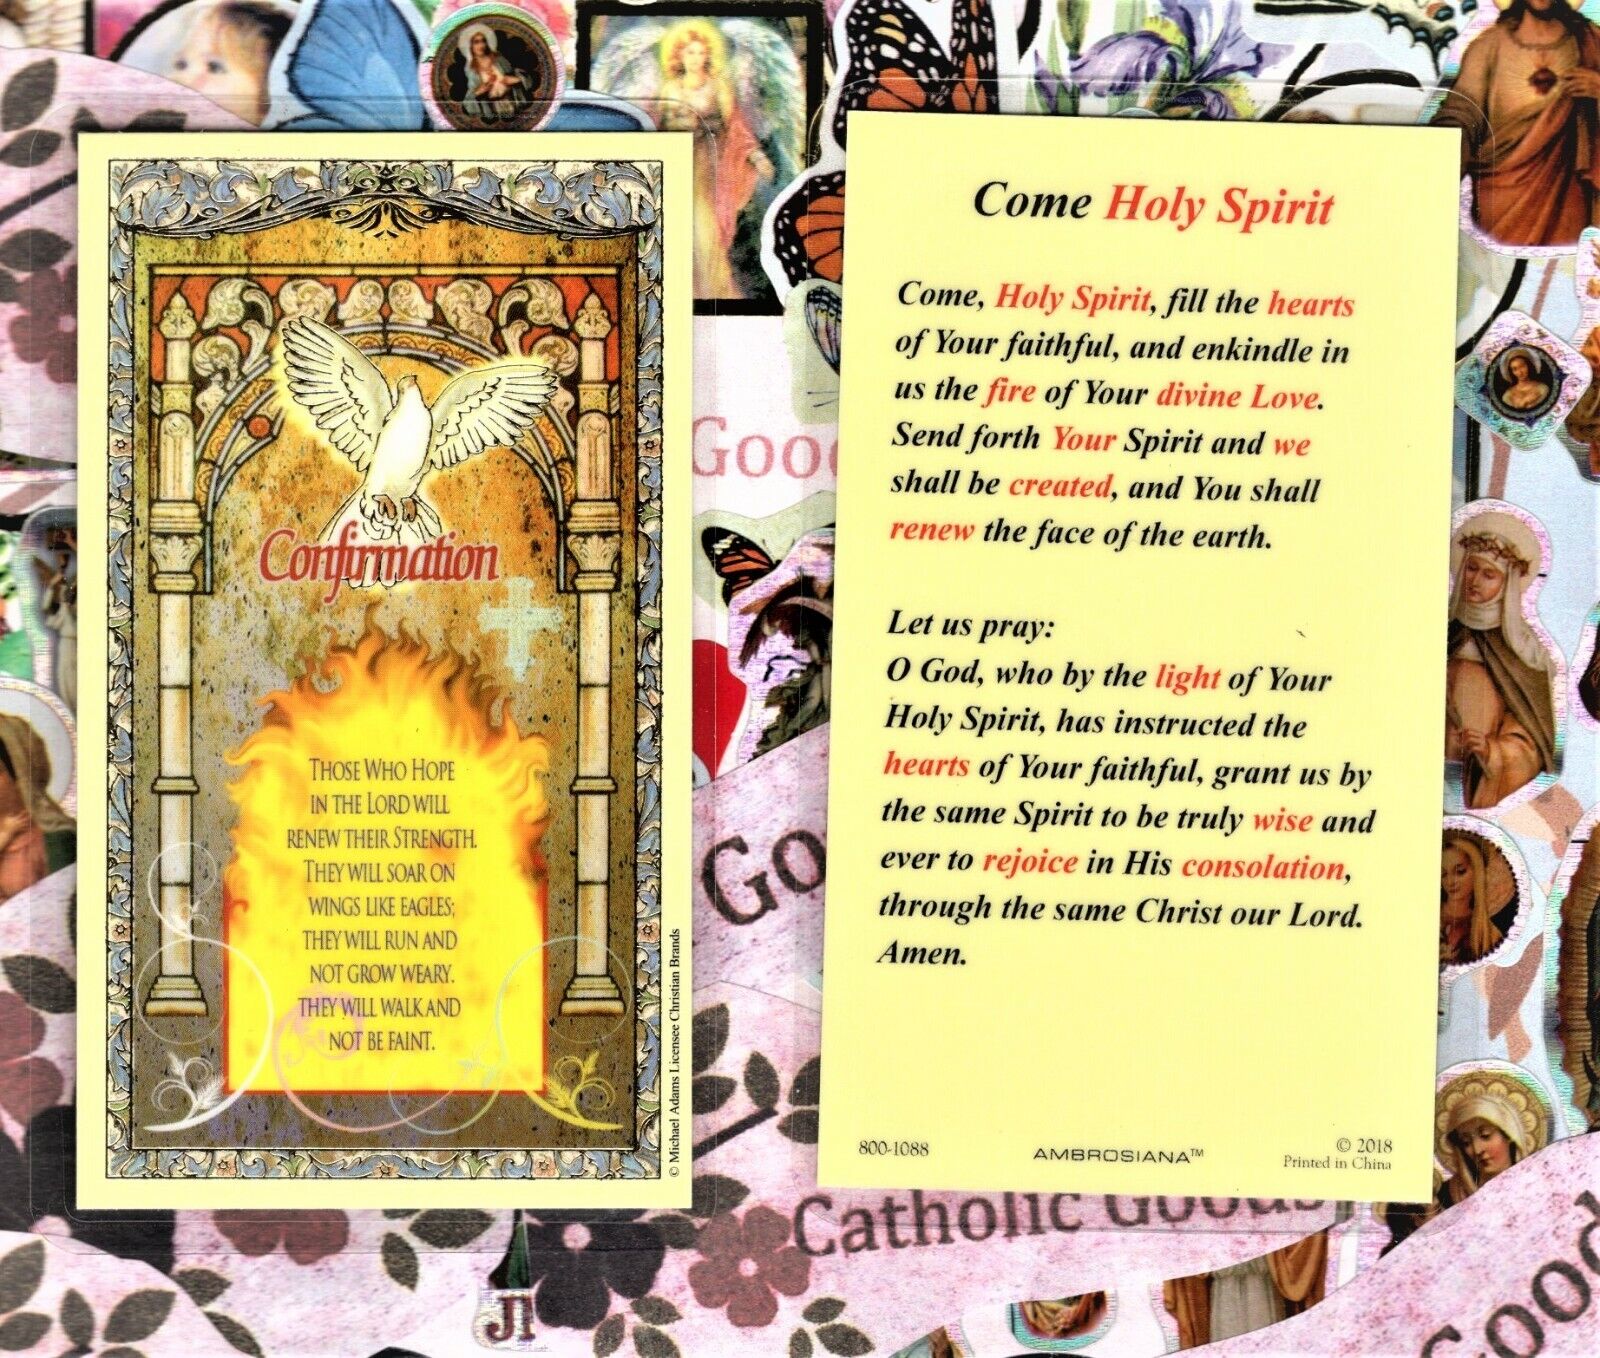 Confirmation Prayer + Come Holy Spirit - Laminated Holy Card 800-1088